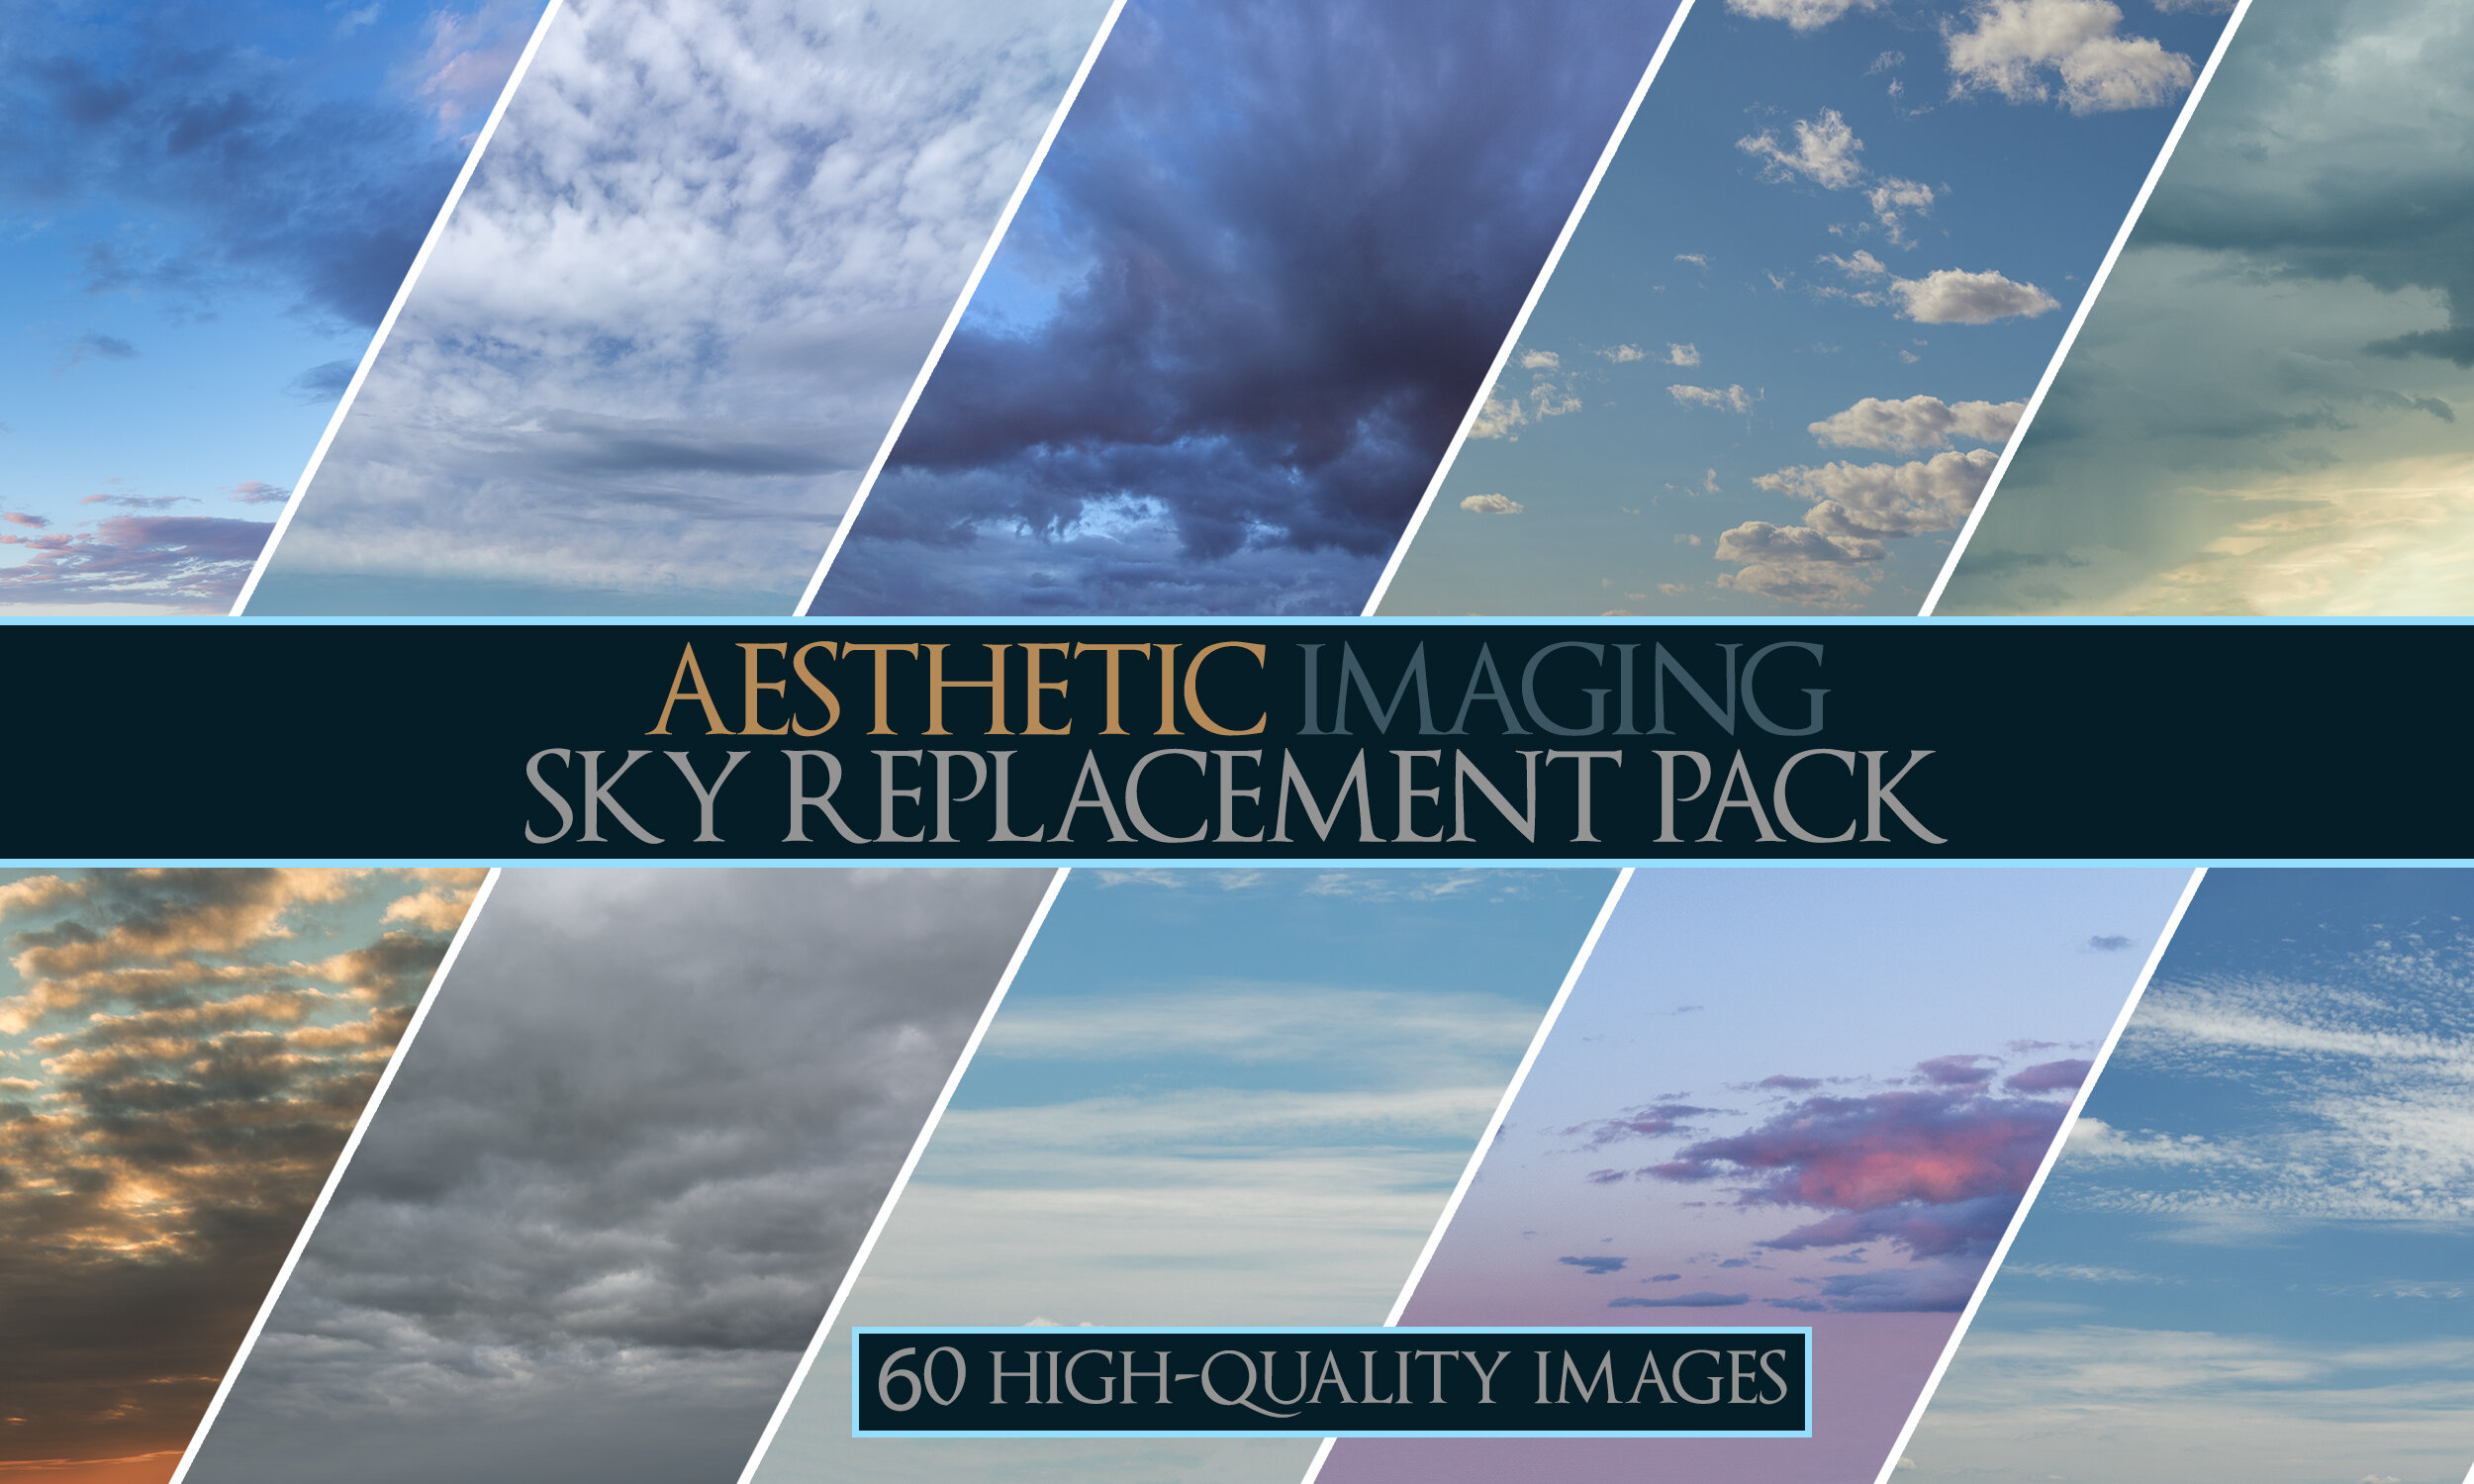 Tired of unsightly skies ruining your photos? Our background sky remover tool lets you easily eliminate unwanted skies and replace them with a beautiful background of your choice. Click to see how you can enhance the beauty of your photos in just a few clicks!